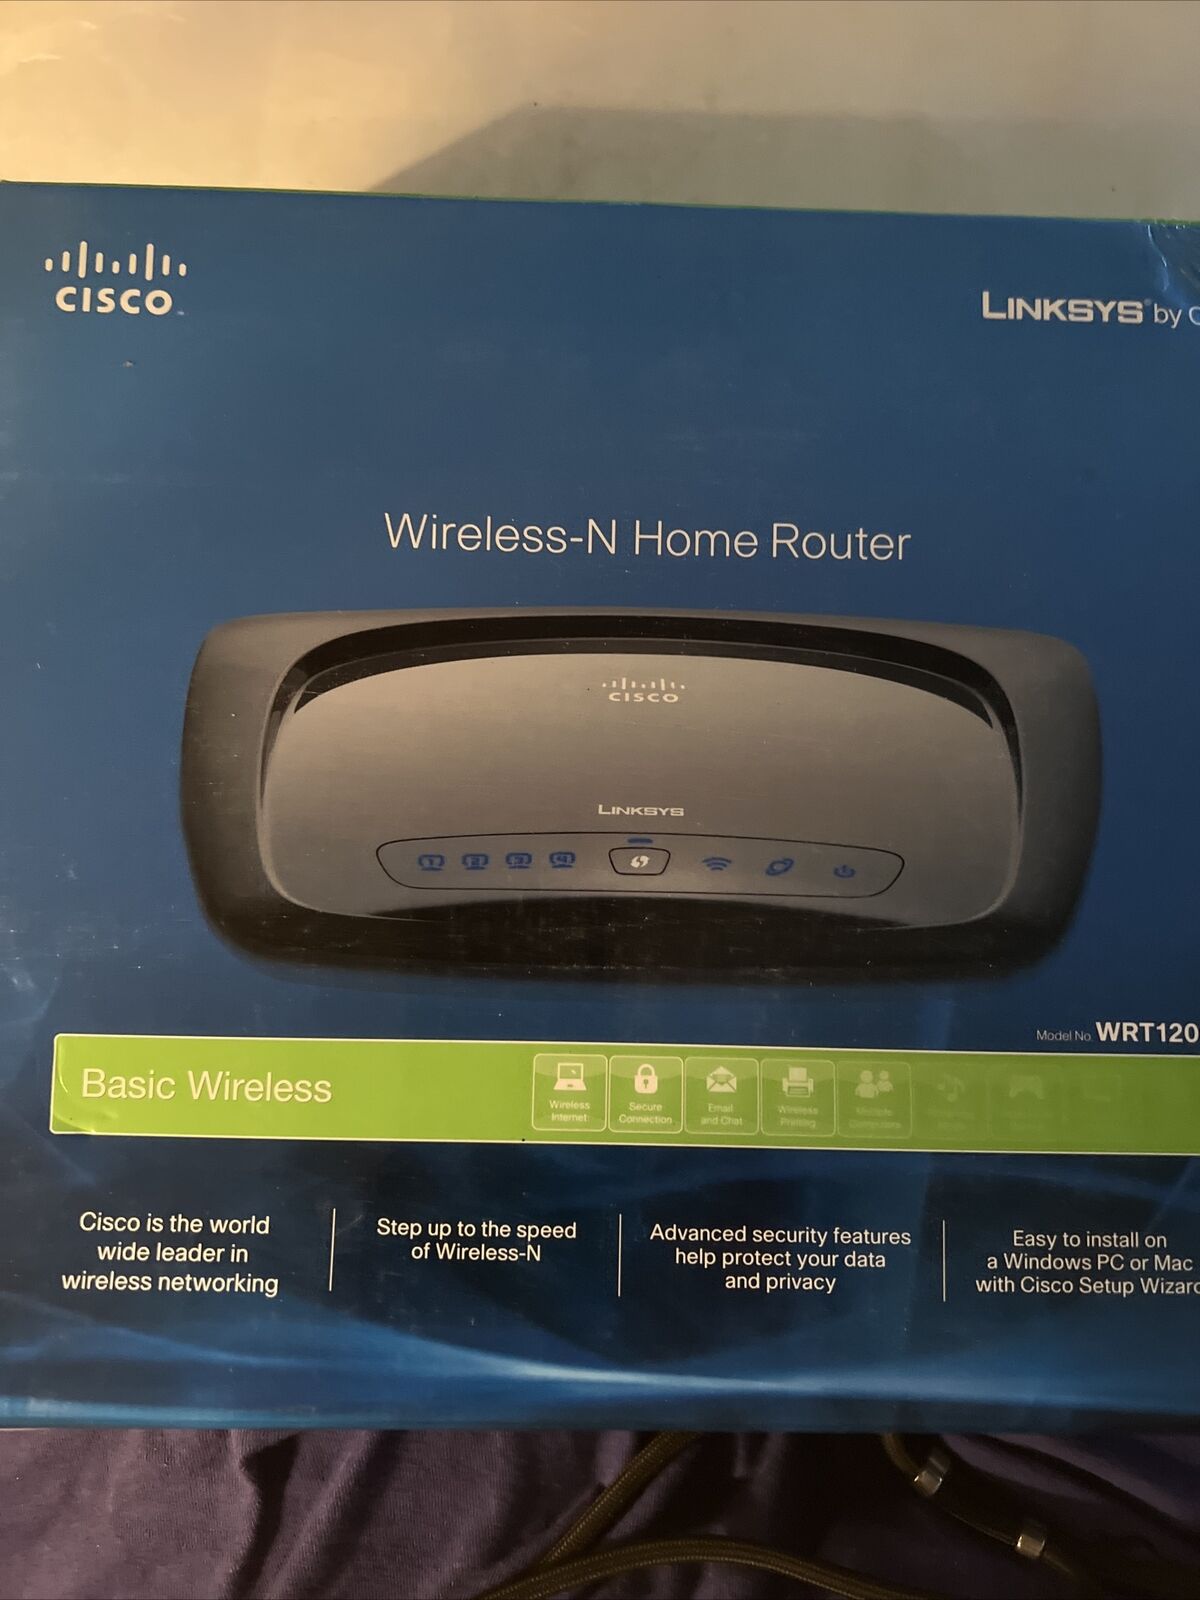 Cisco wireless-N home router